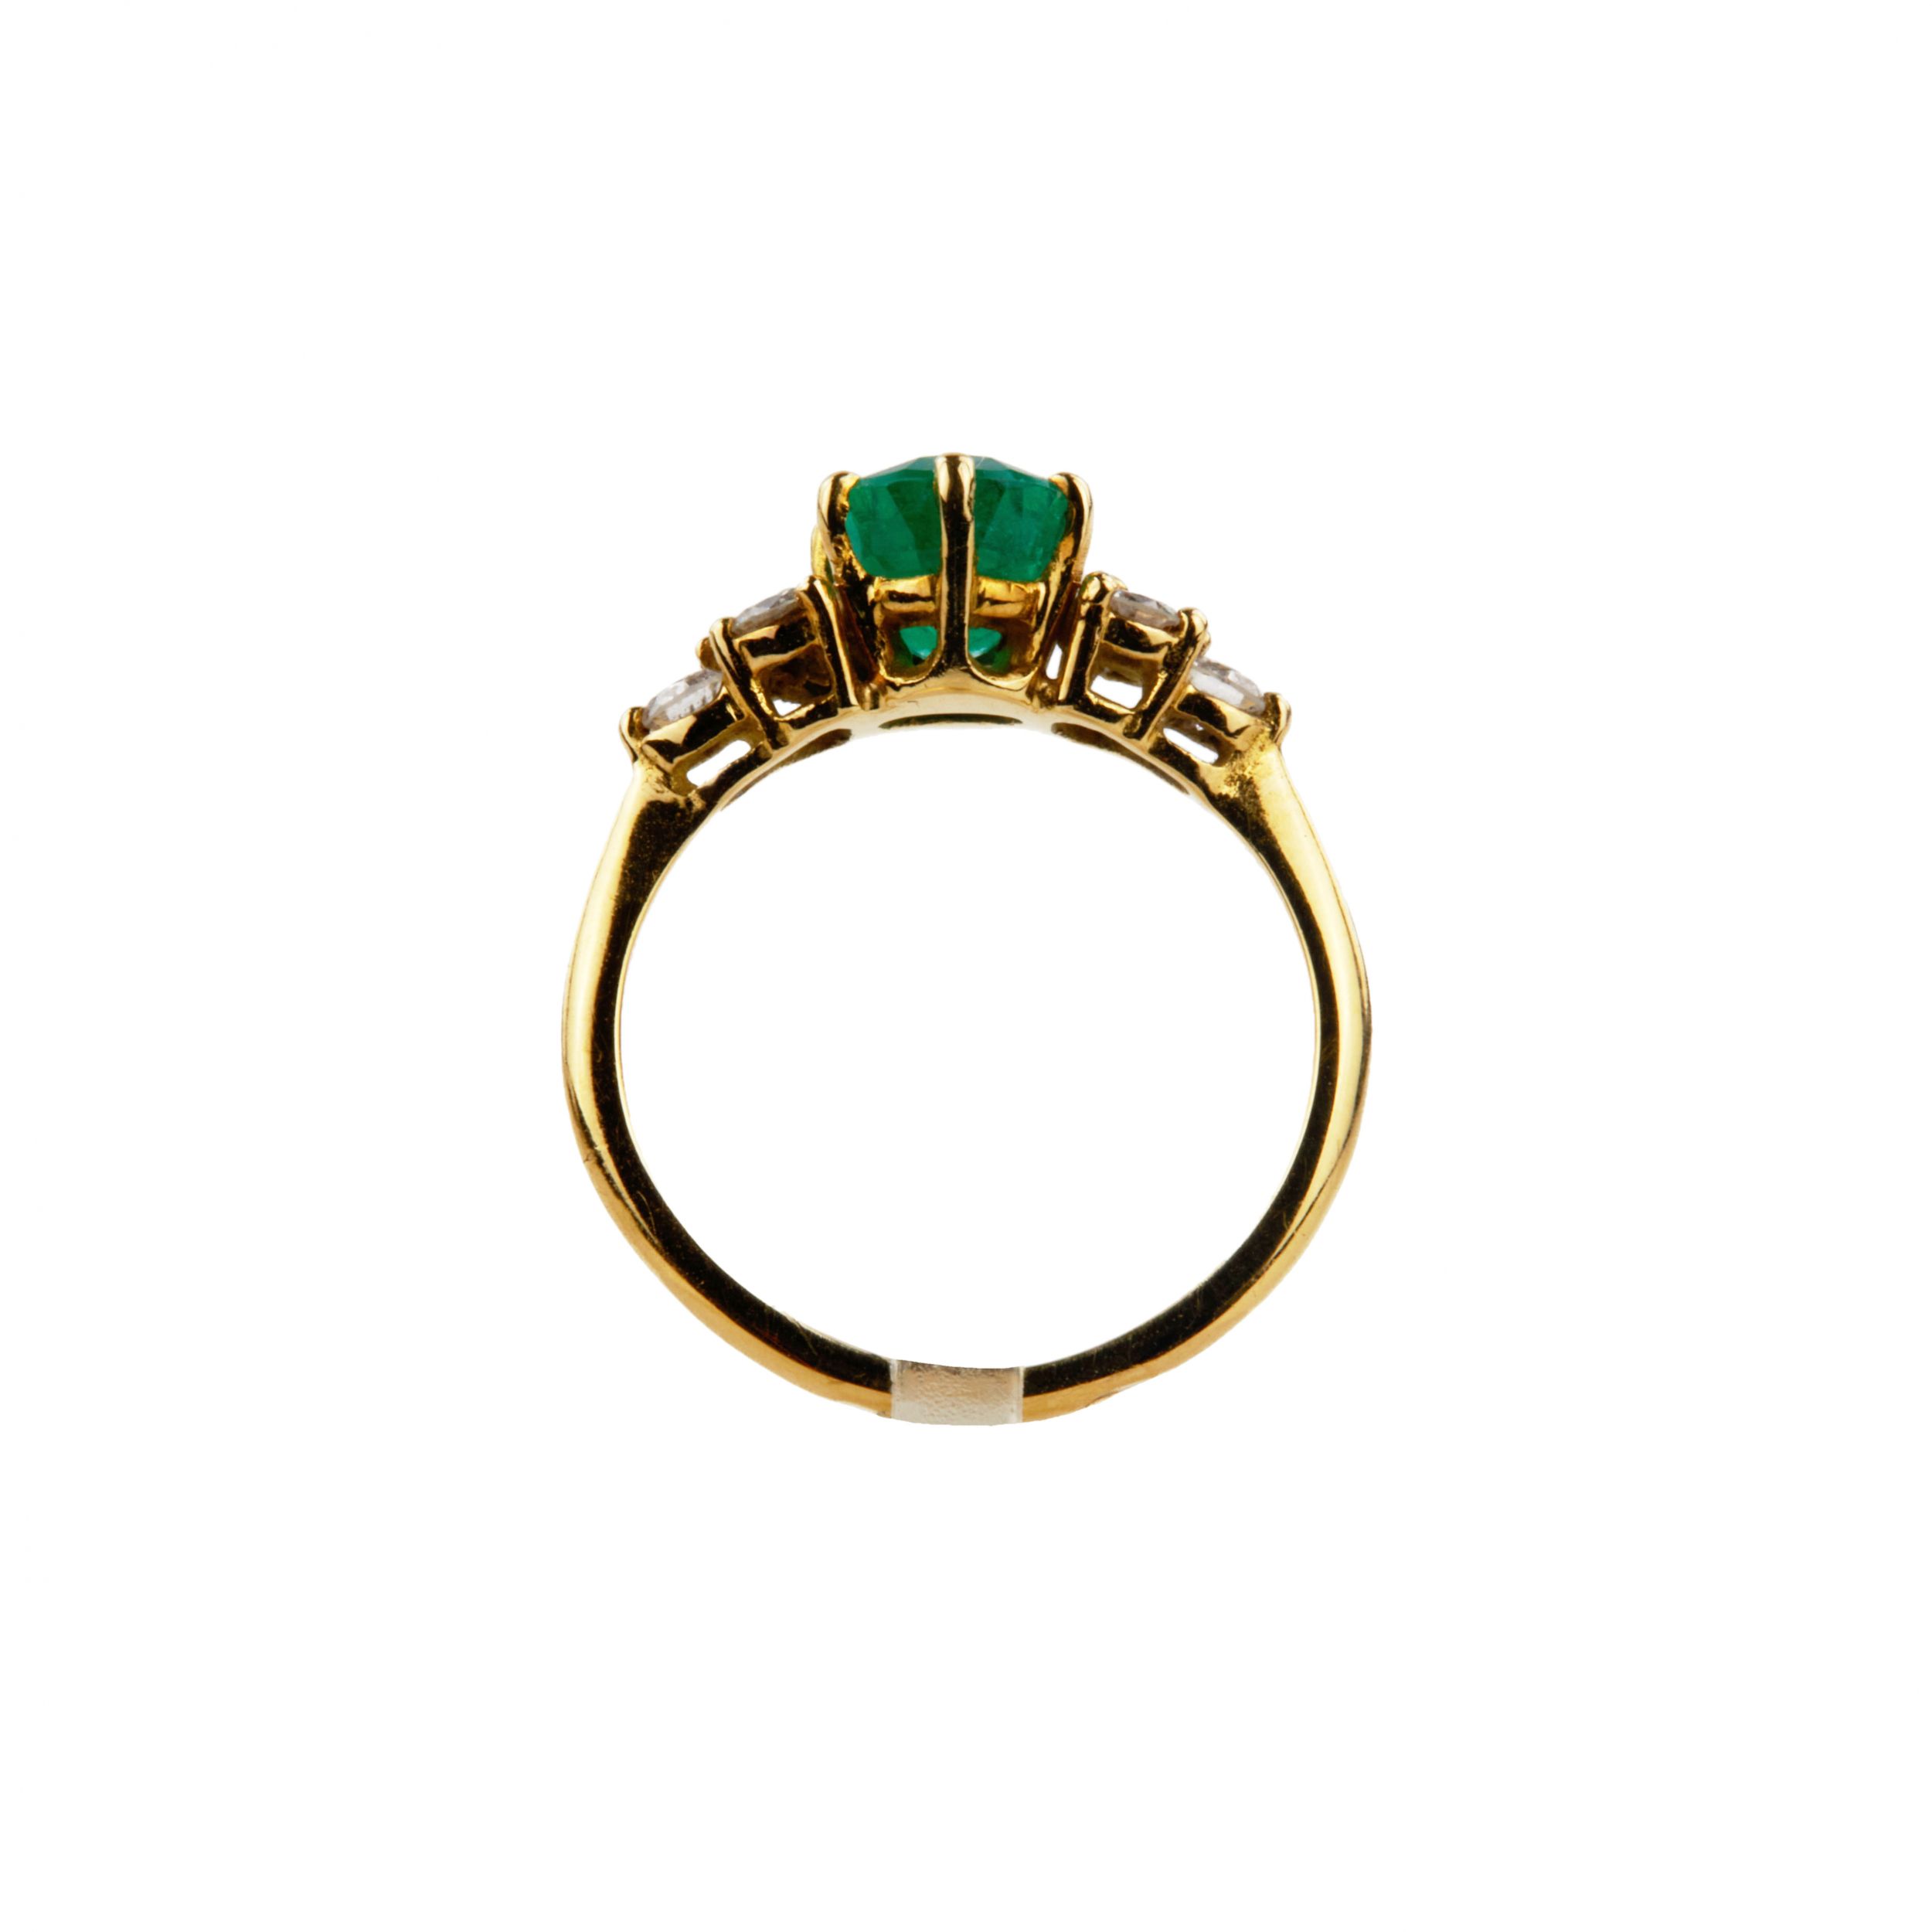 Gold ring with emerald and diamonds, classic design, total weight 3.10 gr. Colombian emerald 1.6 ct. - Image 4 of 5